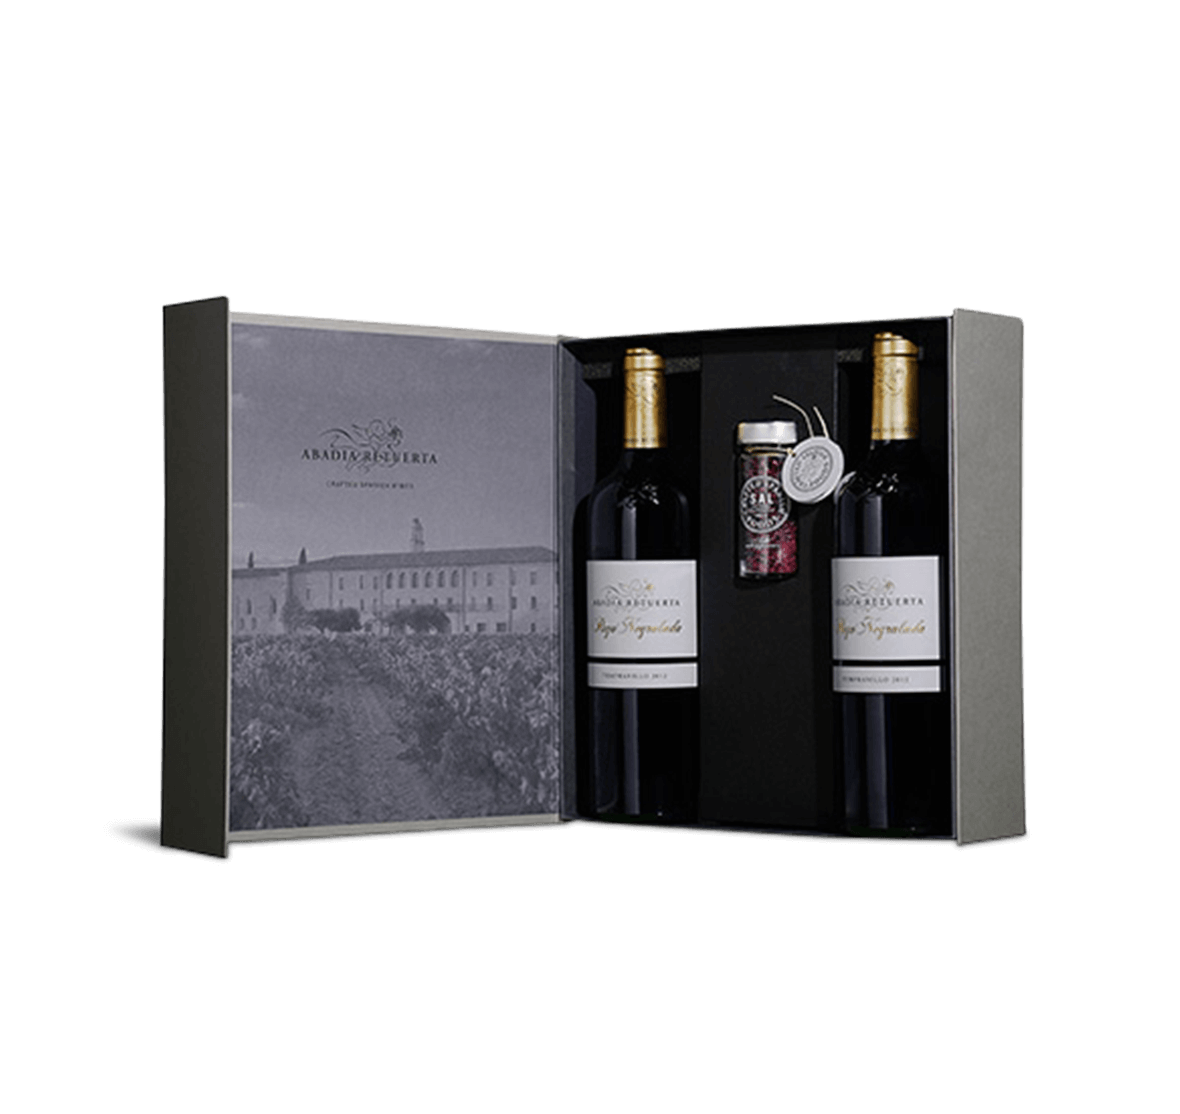 Premium Case - Two Bottles and One Estate Product